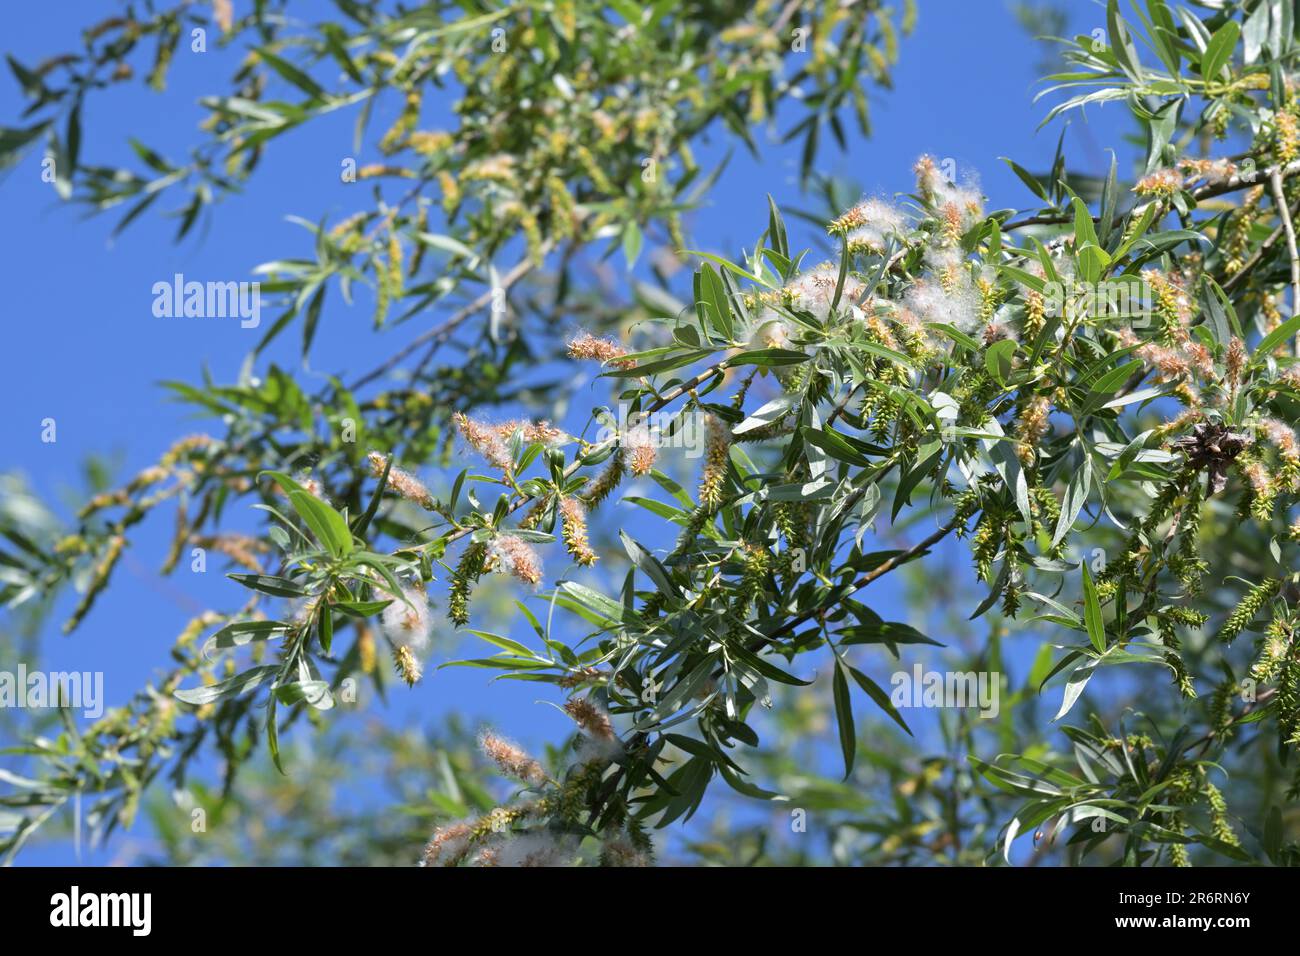 White Willow (Salix alba) in midsummer with ripe seeds embedded in silky wooly hairs, which aids the flight and dispersal in the wind, blue sky, selec Stock Photo